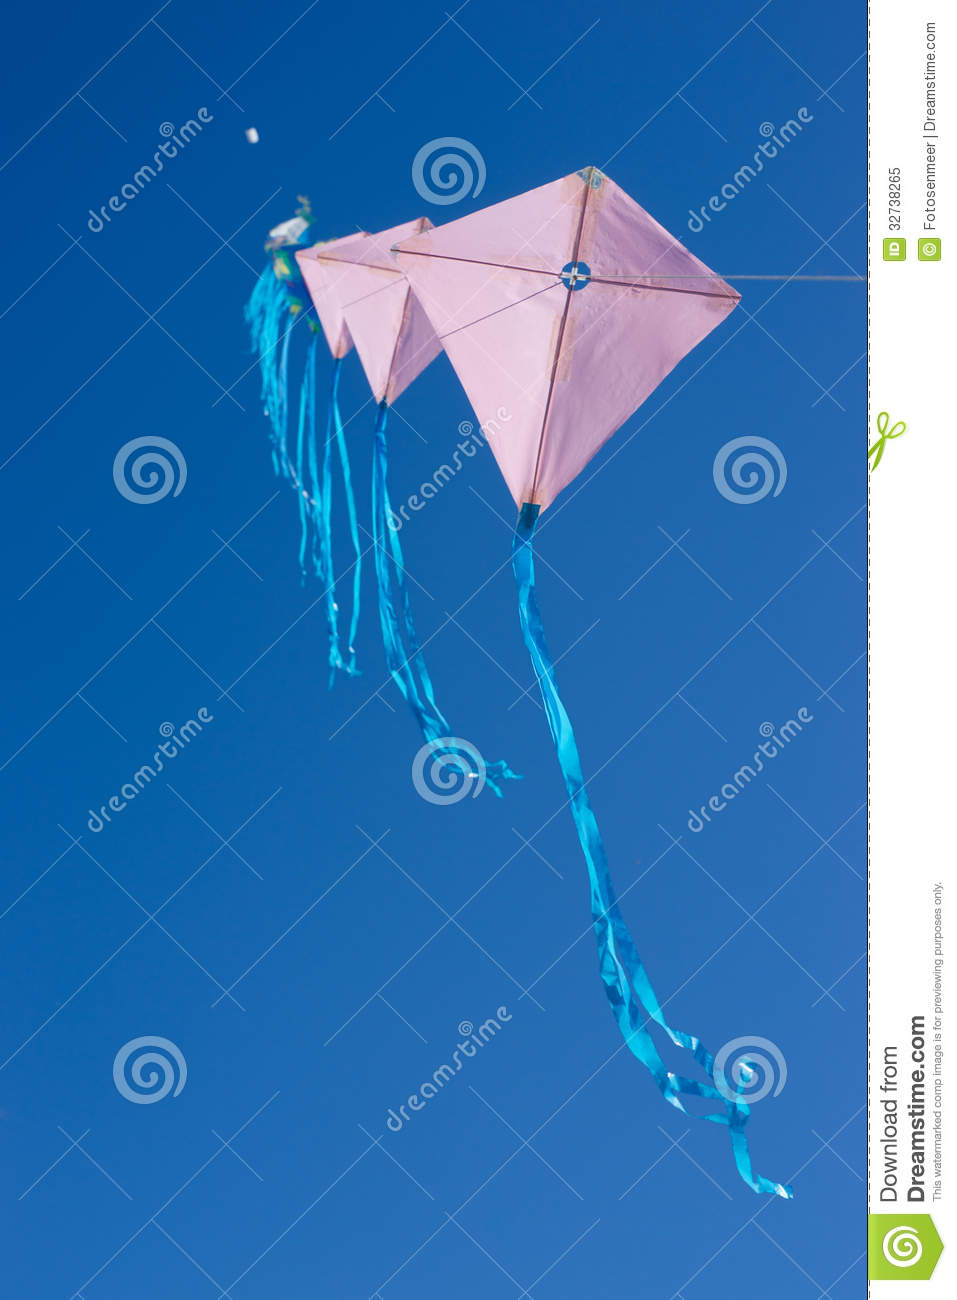 Lots Of Kites In The Sky Royalty Free Stock Photo   Image  32738265